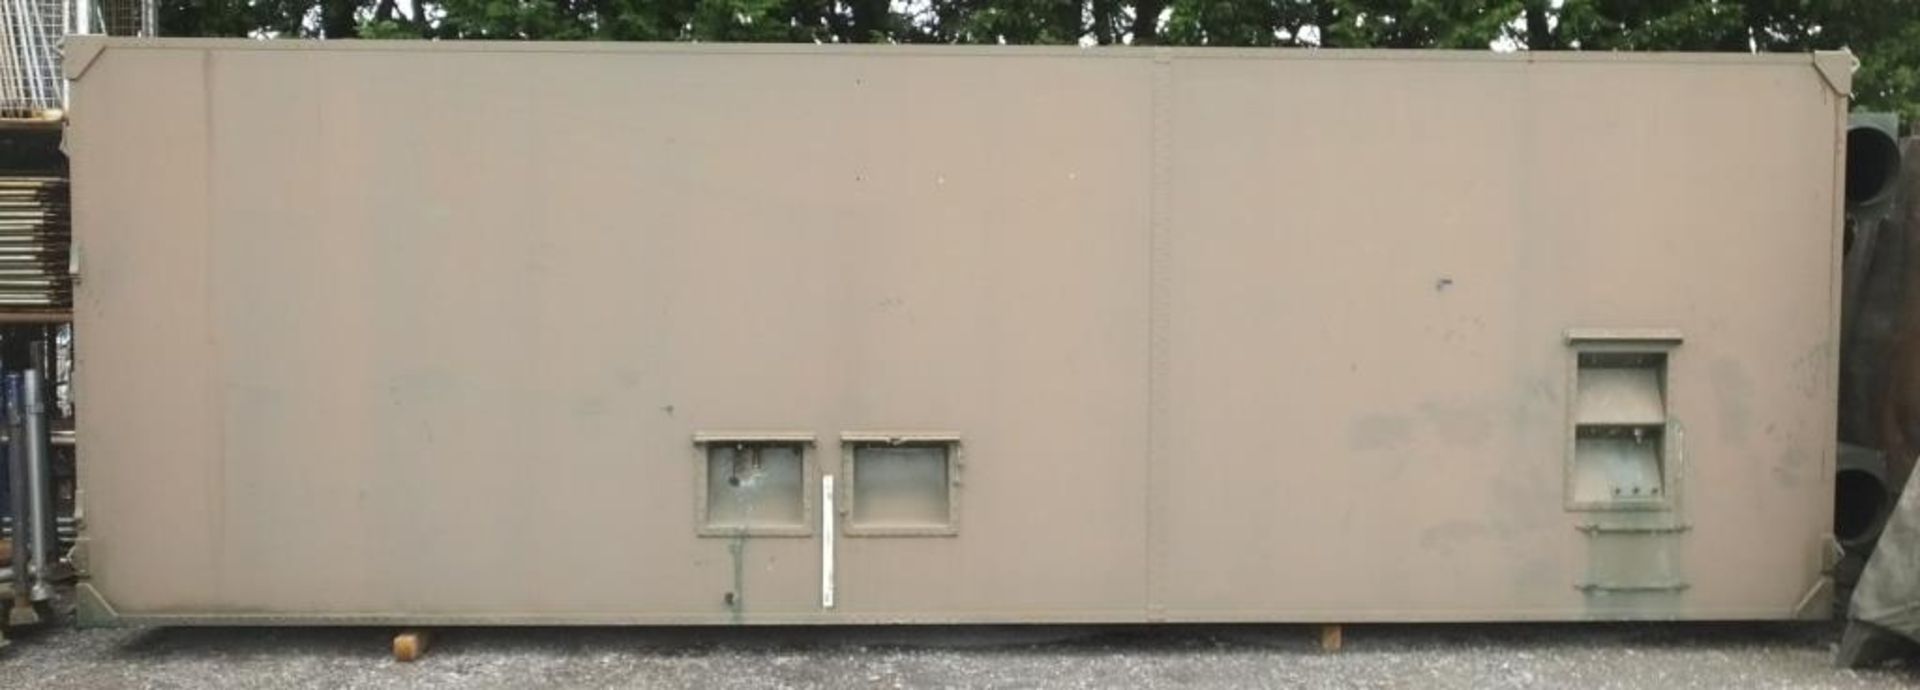 30ft Communication cabin - 19 inch racks, internal doors - LOCATED AT OUR SKEGNESS SITE - Image 24 of 24